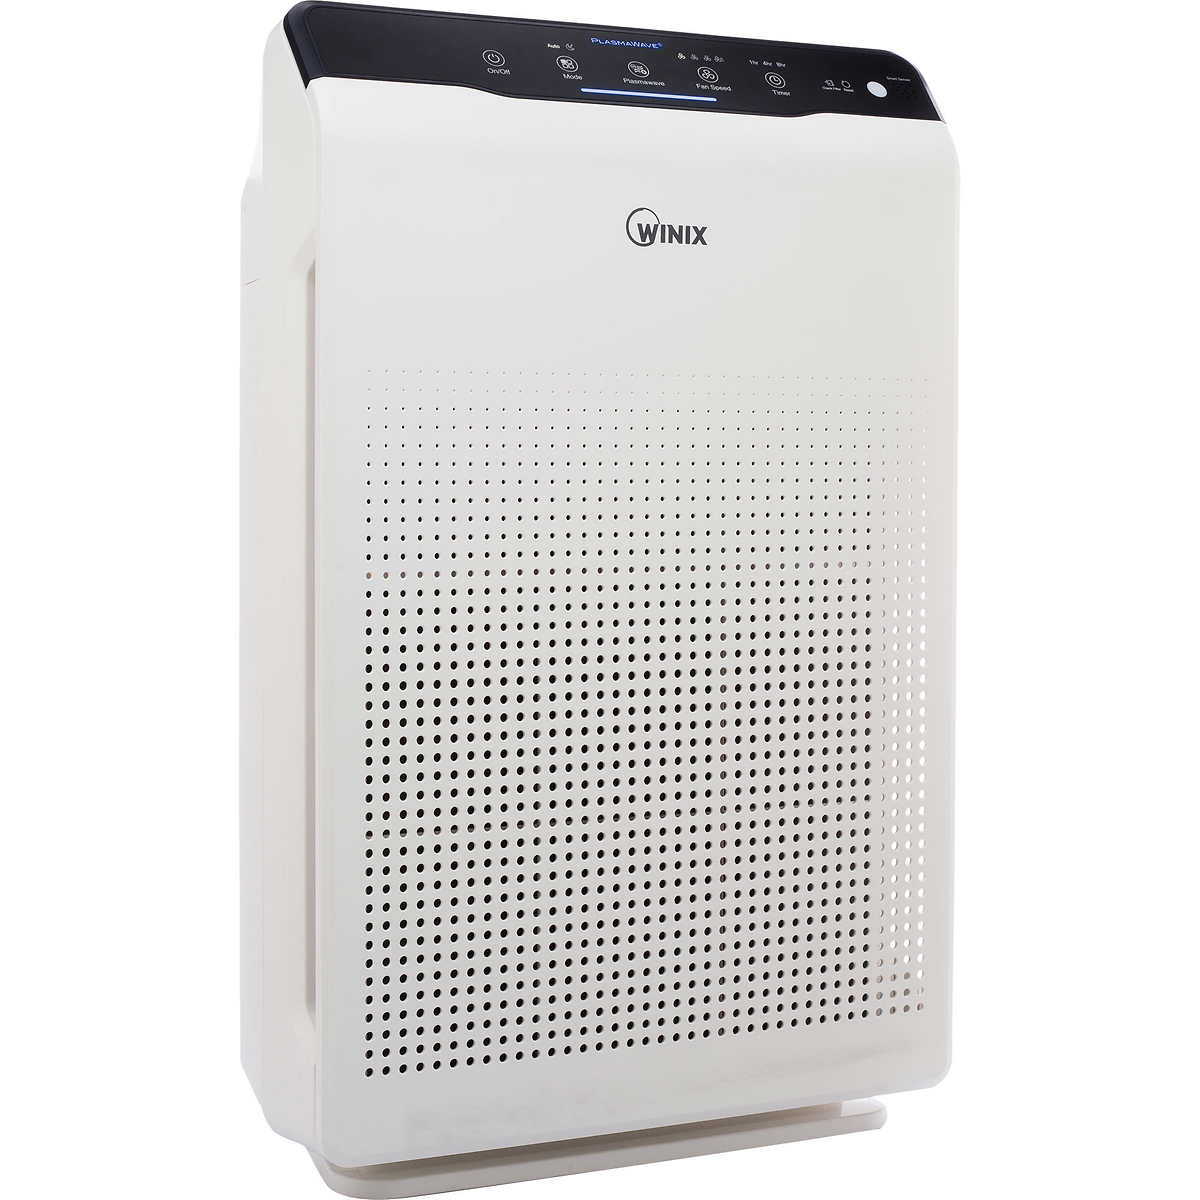 Costco Winix C535 Air Cleaner Purifier with PlasmaWave Technology